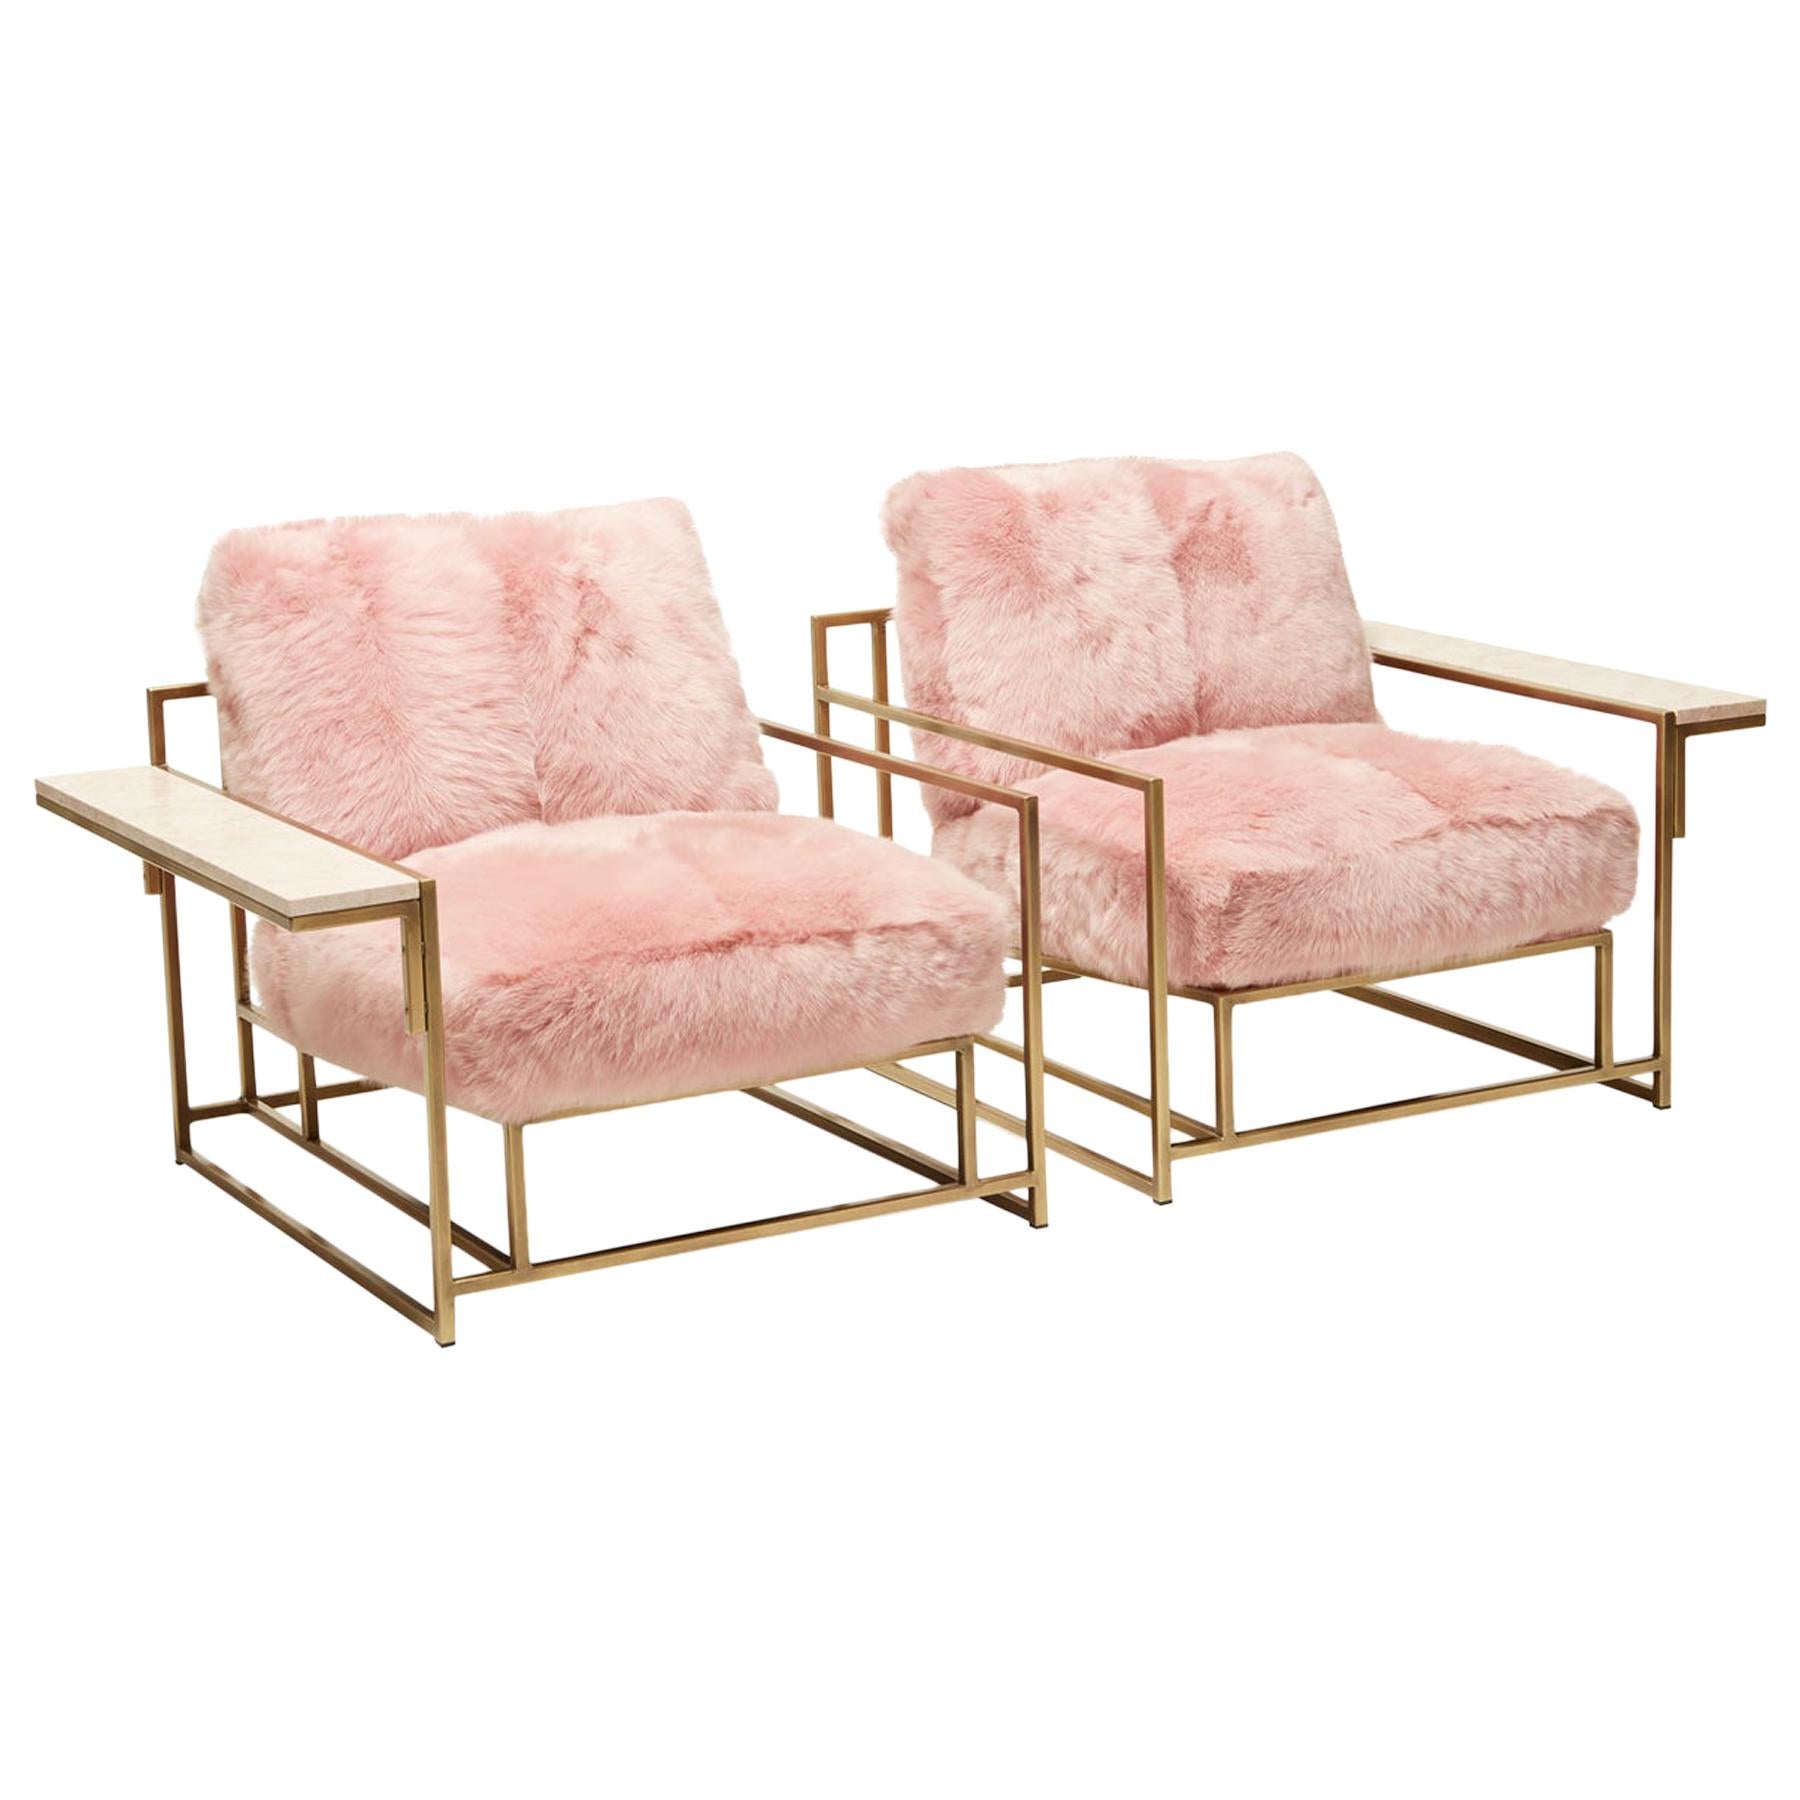 Blush Pink Shearling and Antique Brass Armchair Pair